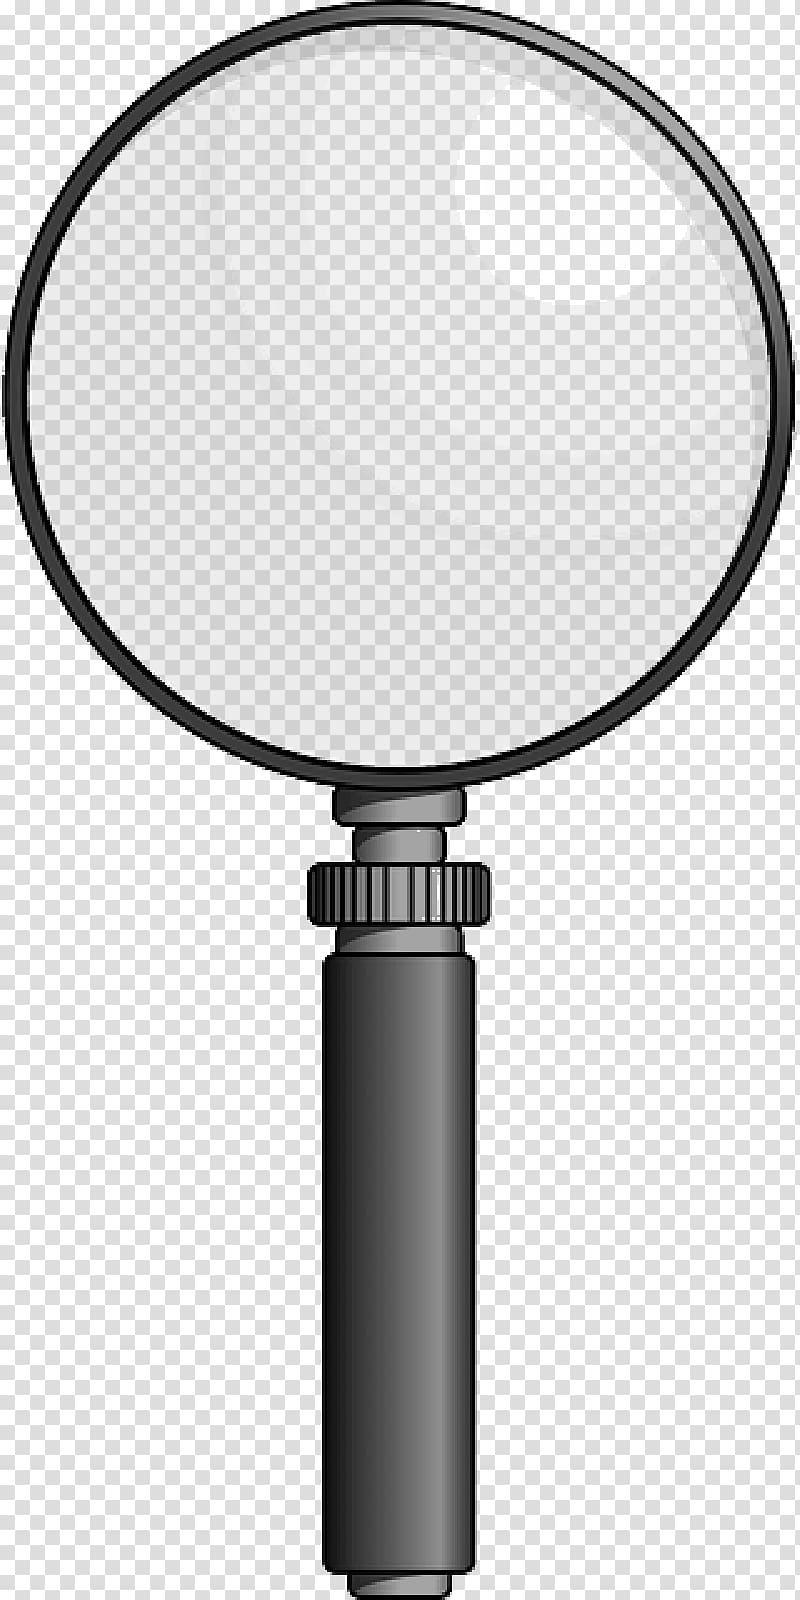 Loupe transparent background PNG clipart